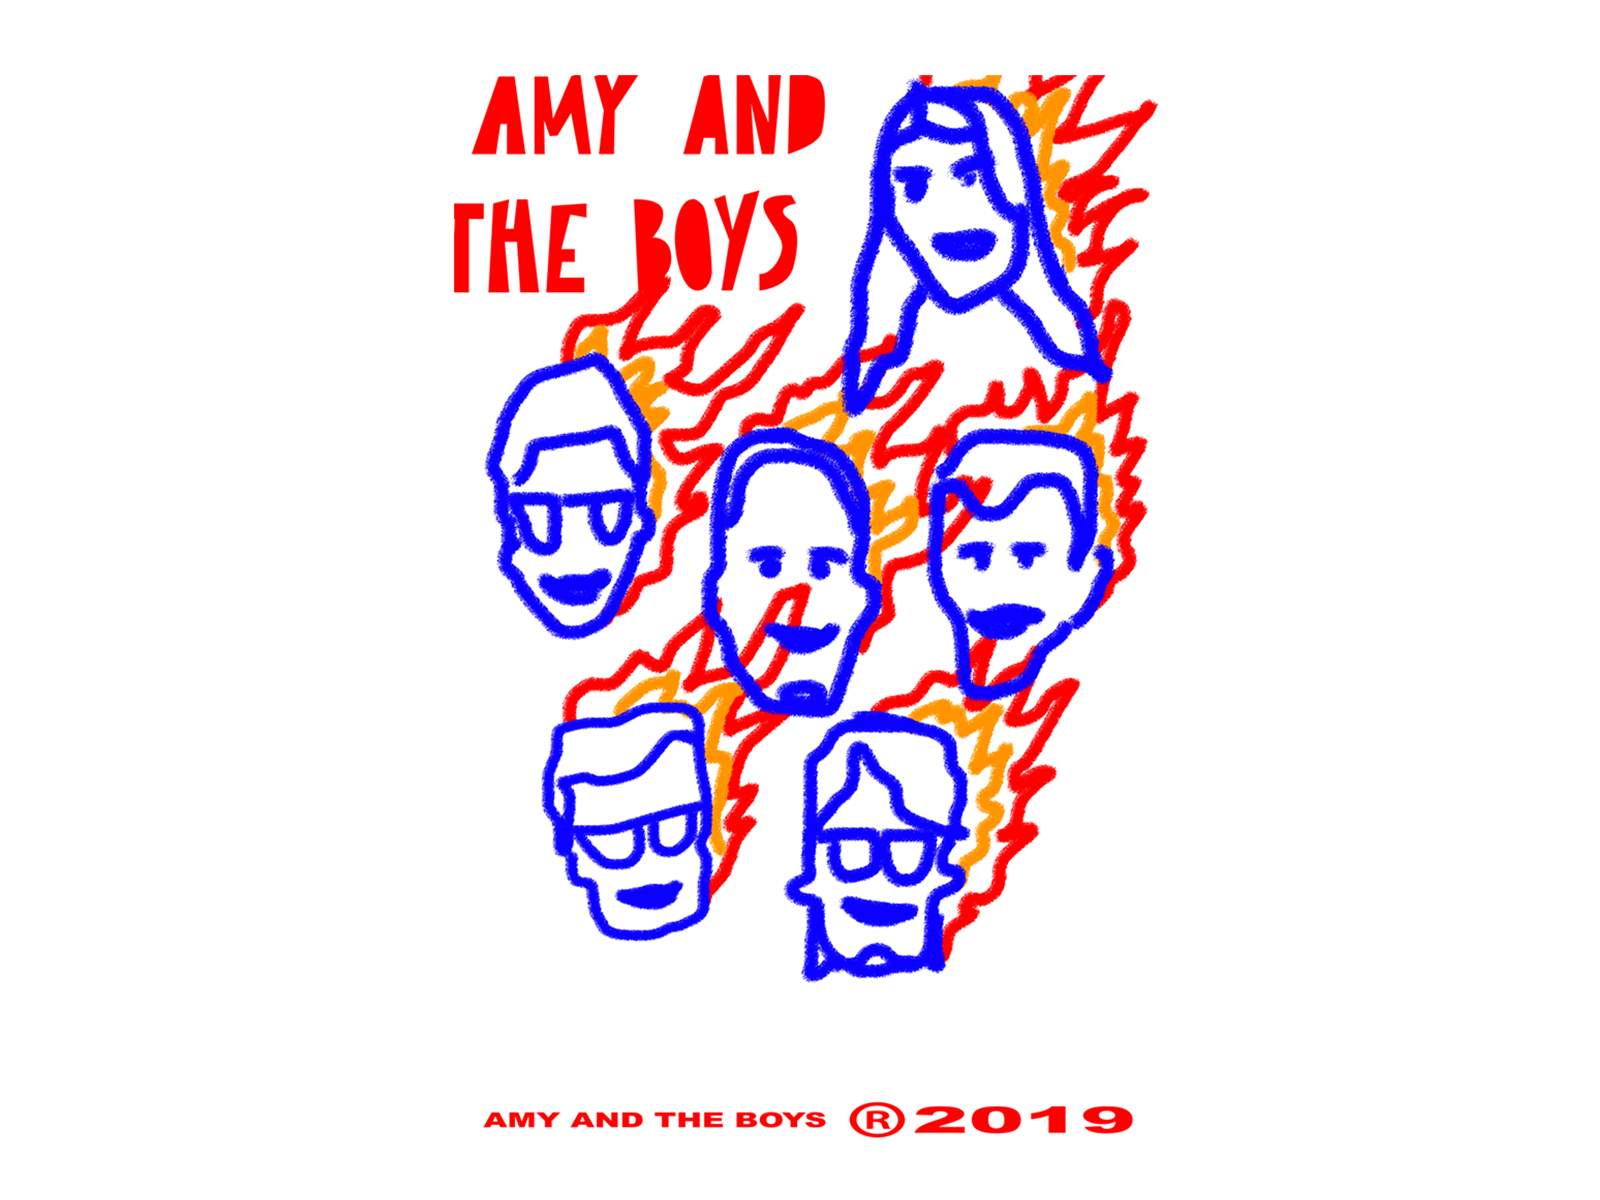 Amy and the Boys